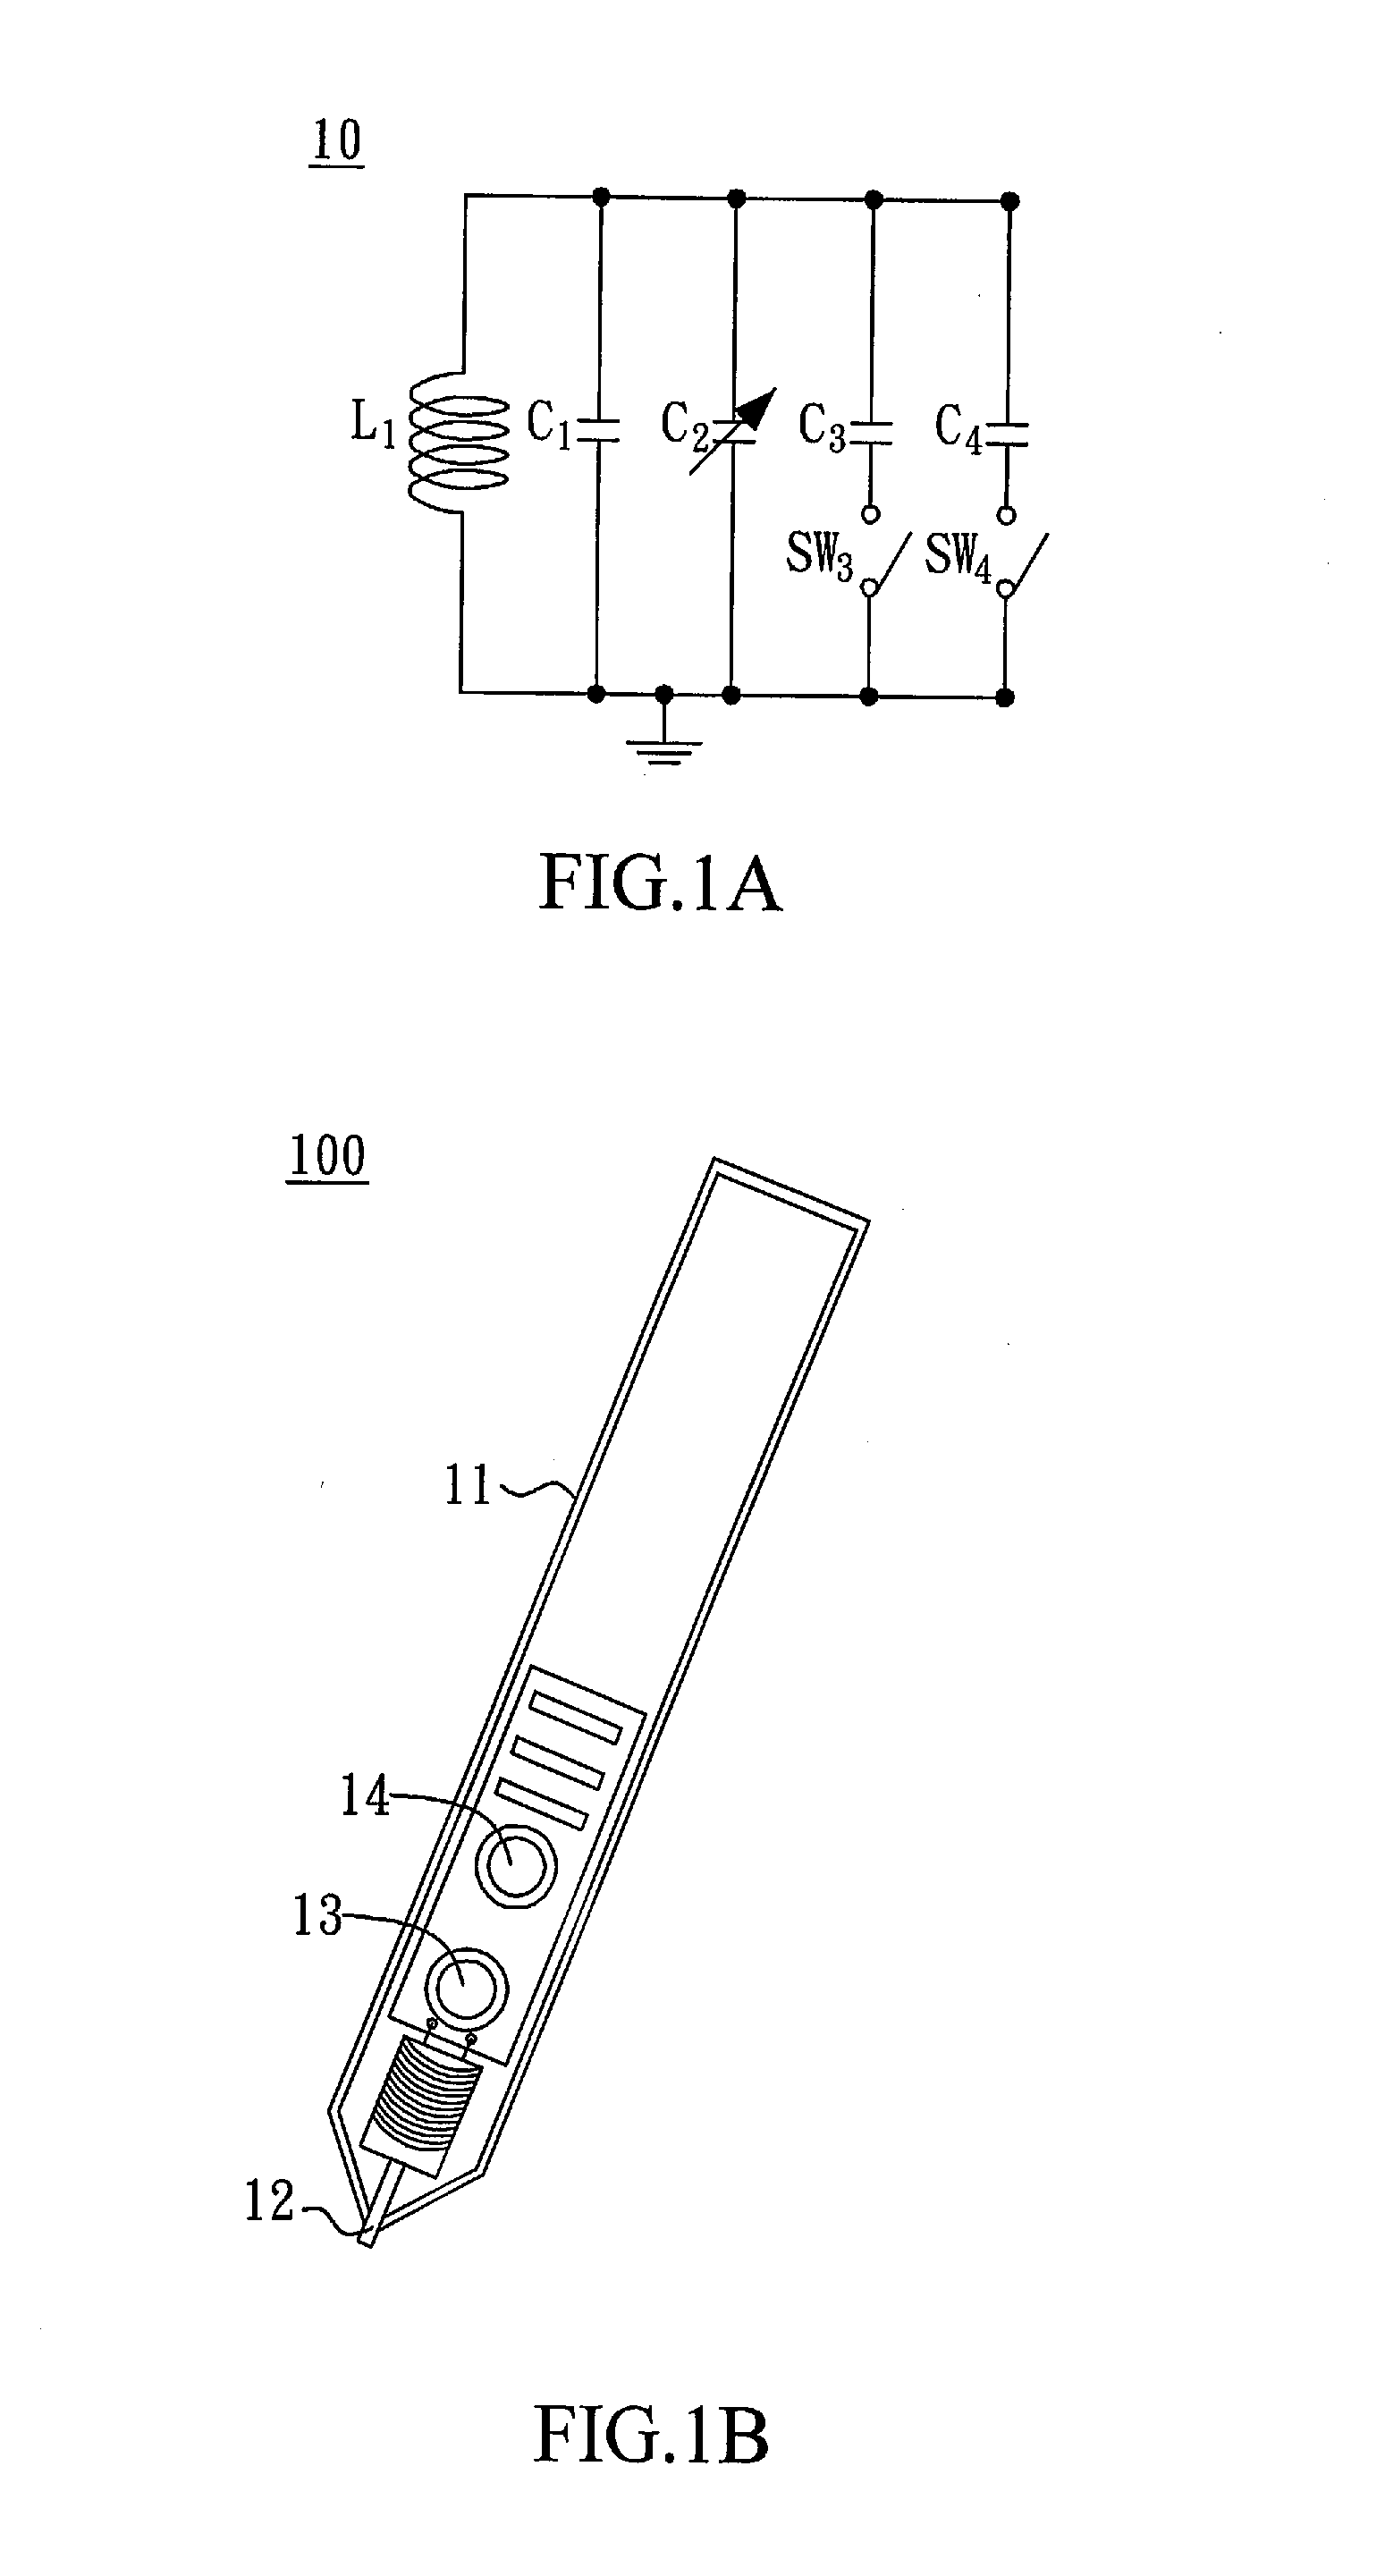 Stylus without active components and an associated touch panel